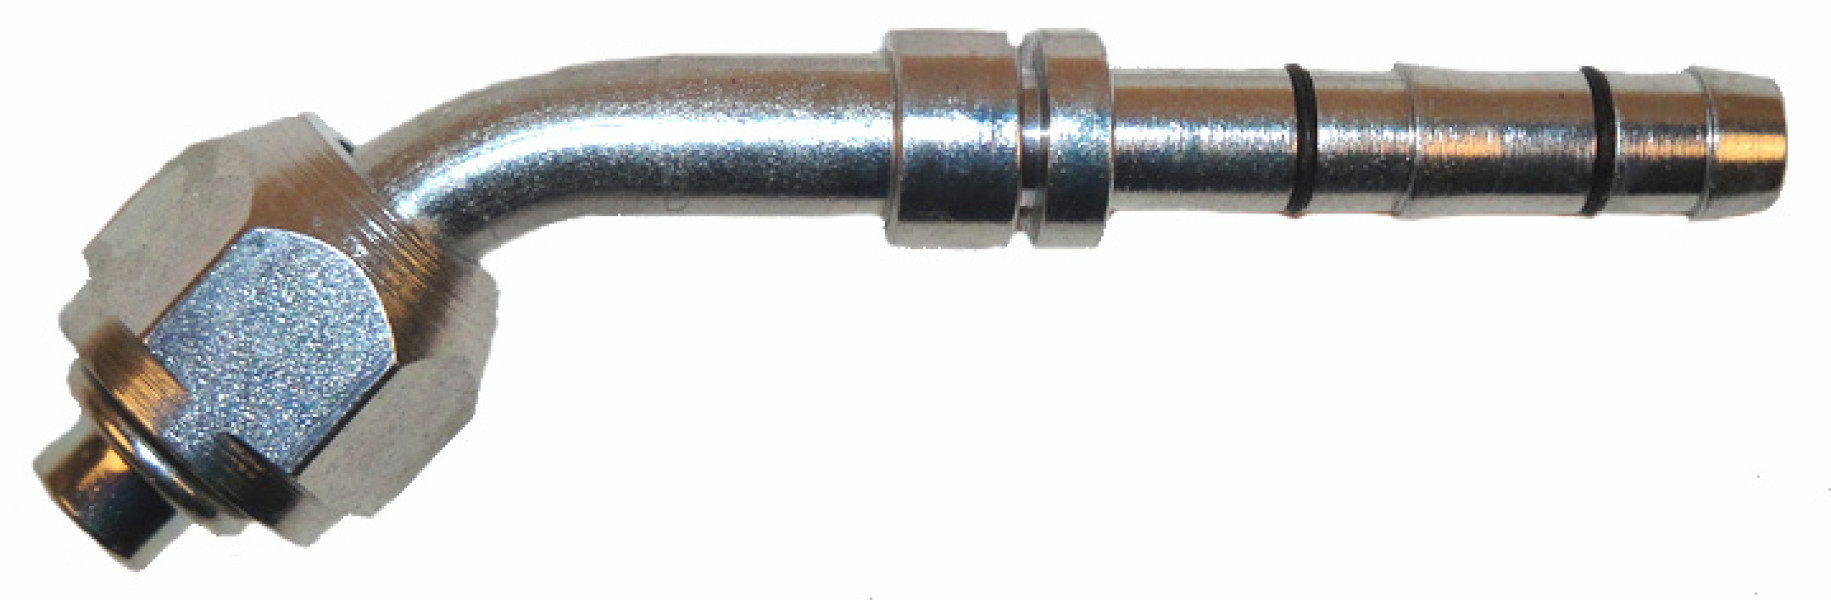 Image of A/C Refrigerant Hose Fitting from Sunair. Part number: FF14183